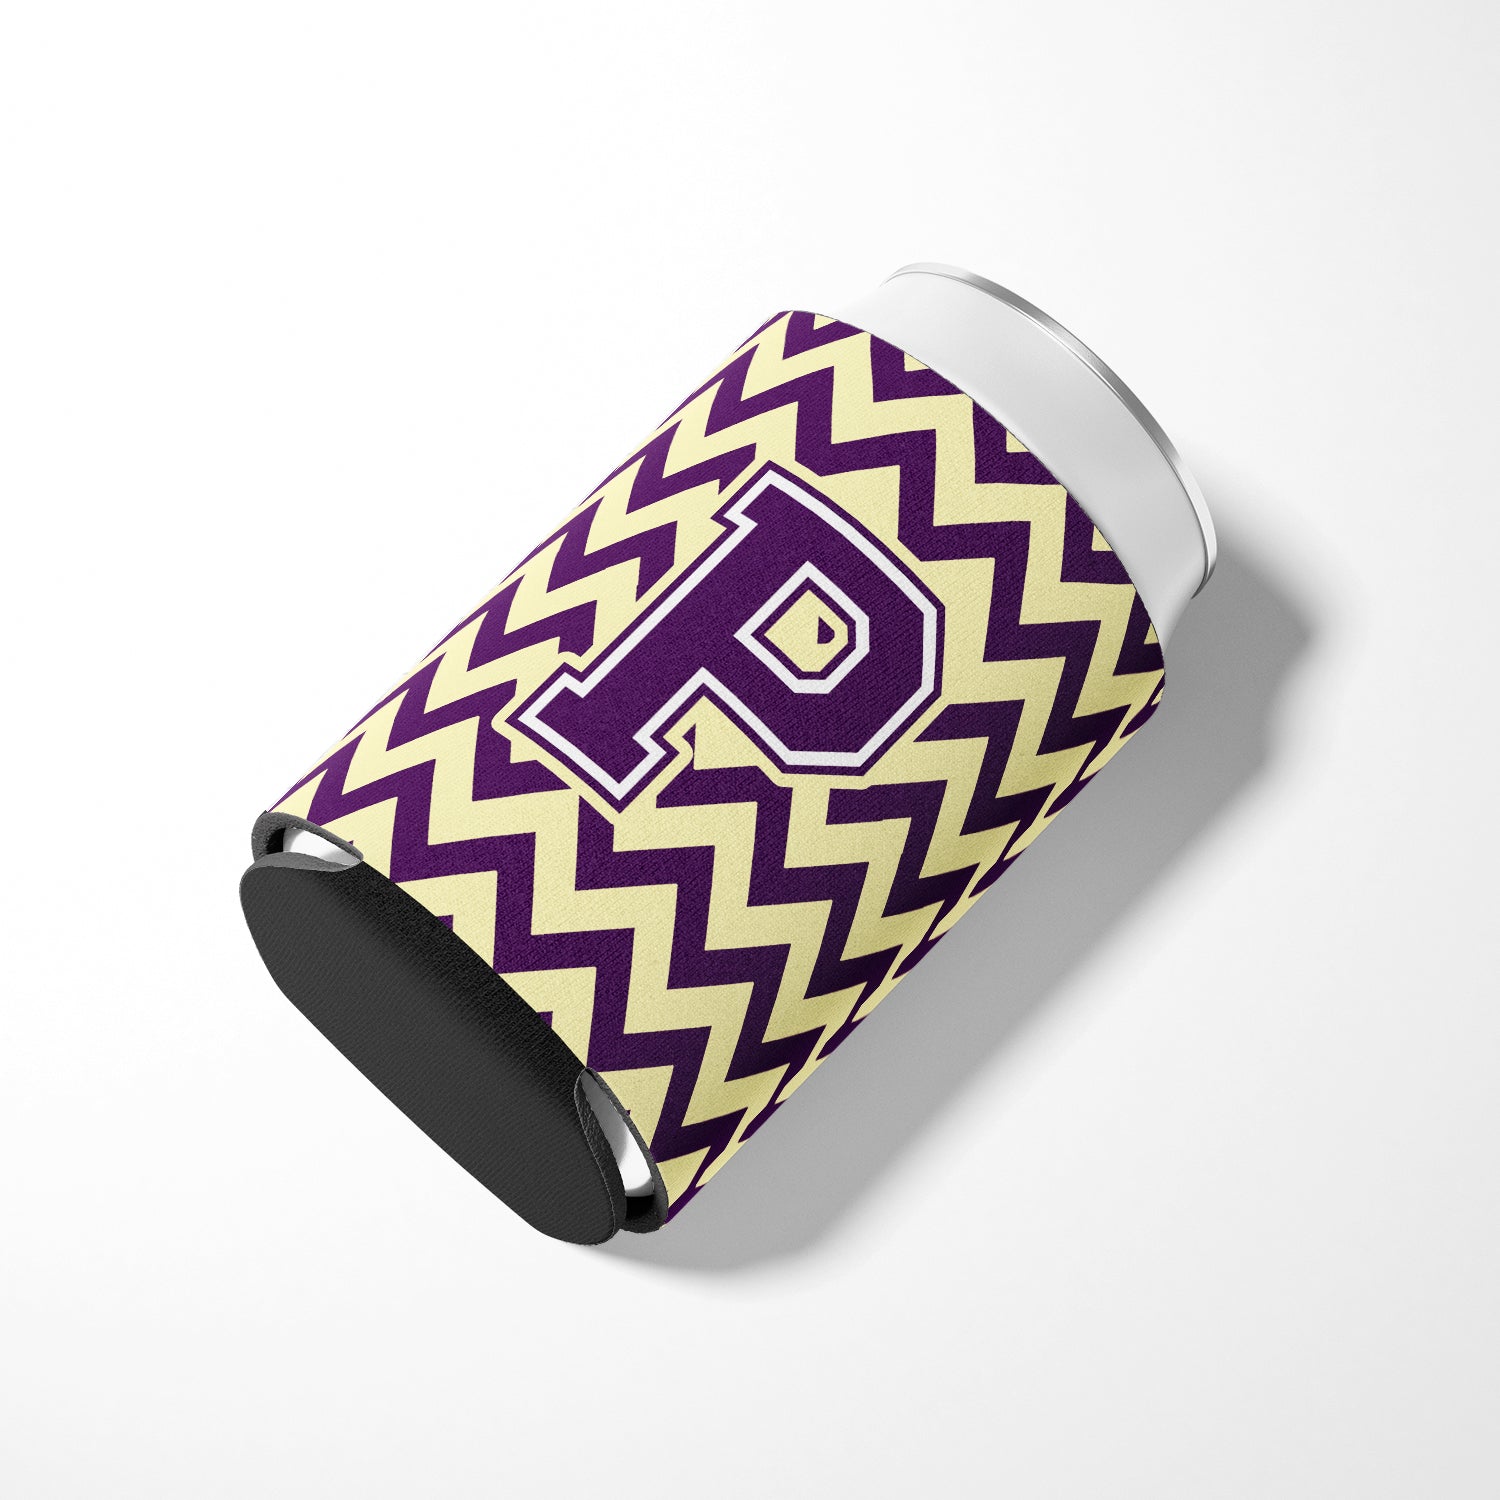 Letter P Chevron Purple and Gold Can or Bottle Hugger CJ1058-PCC